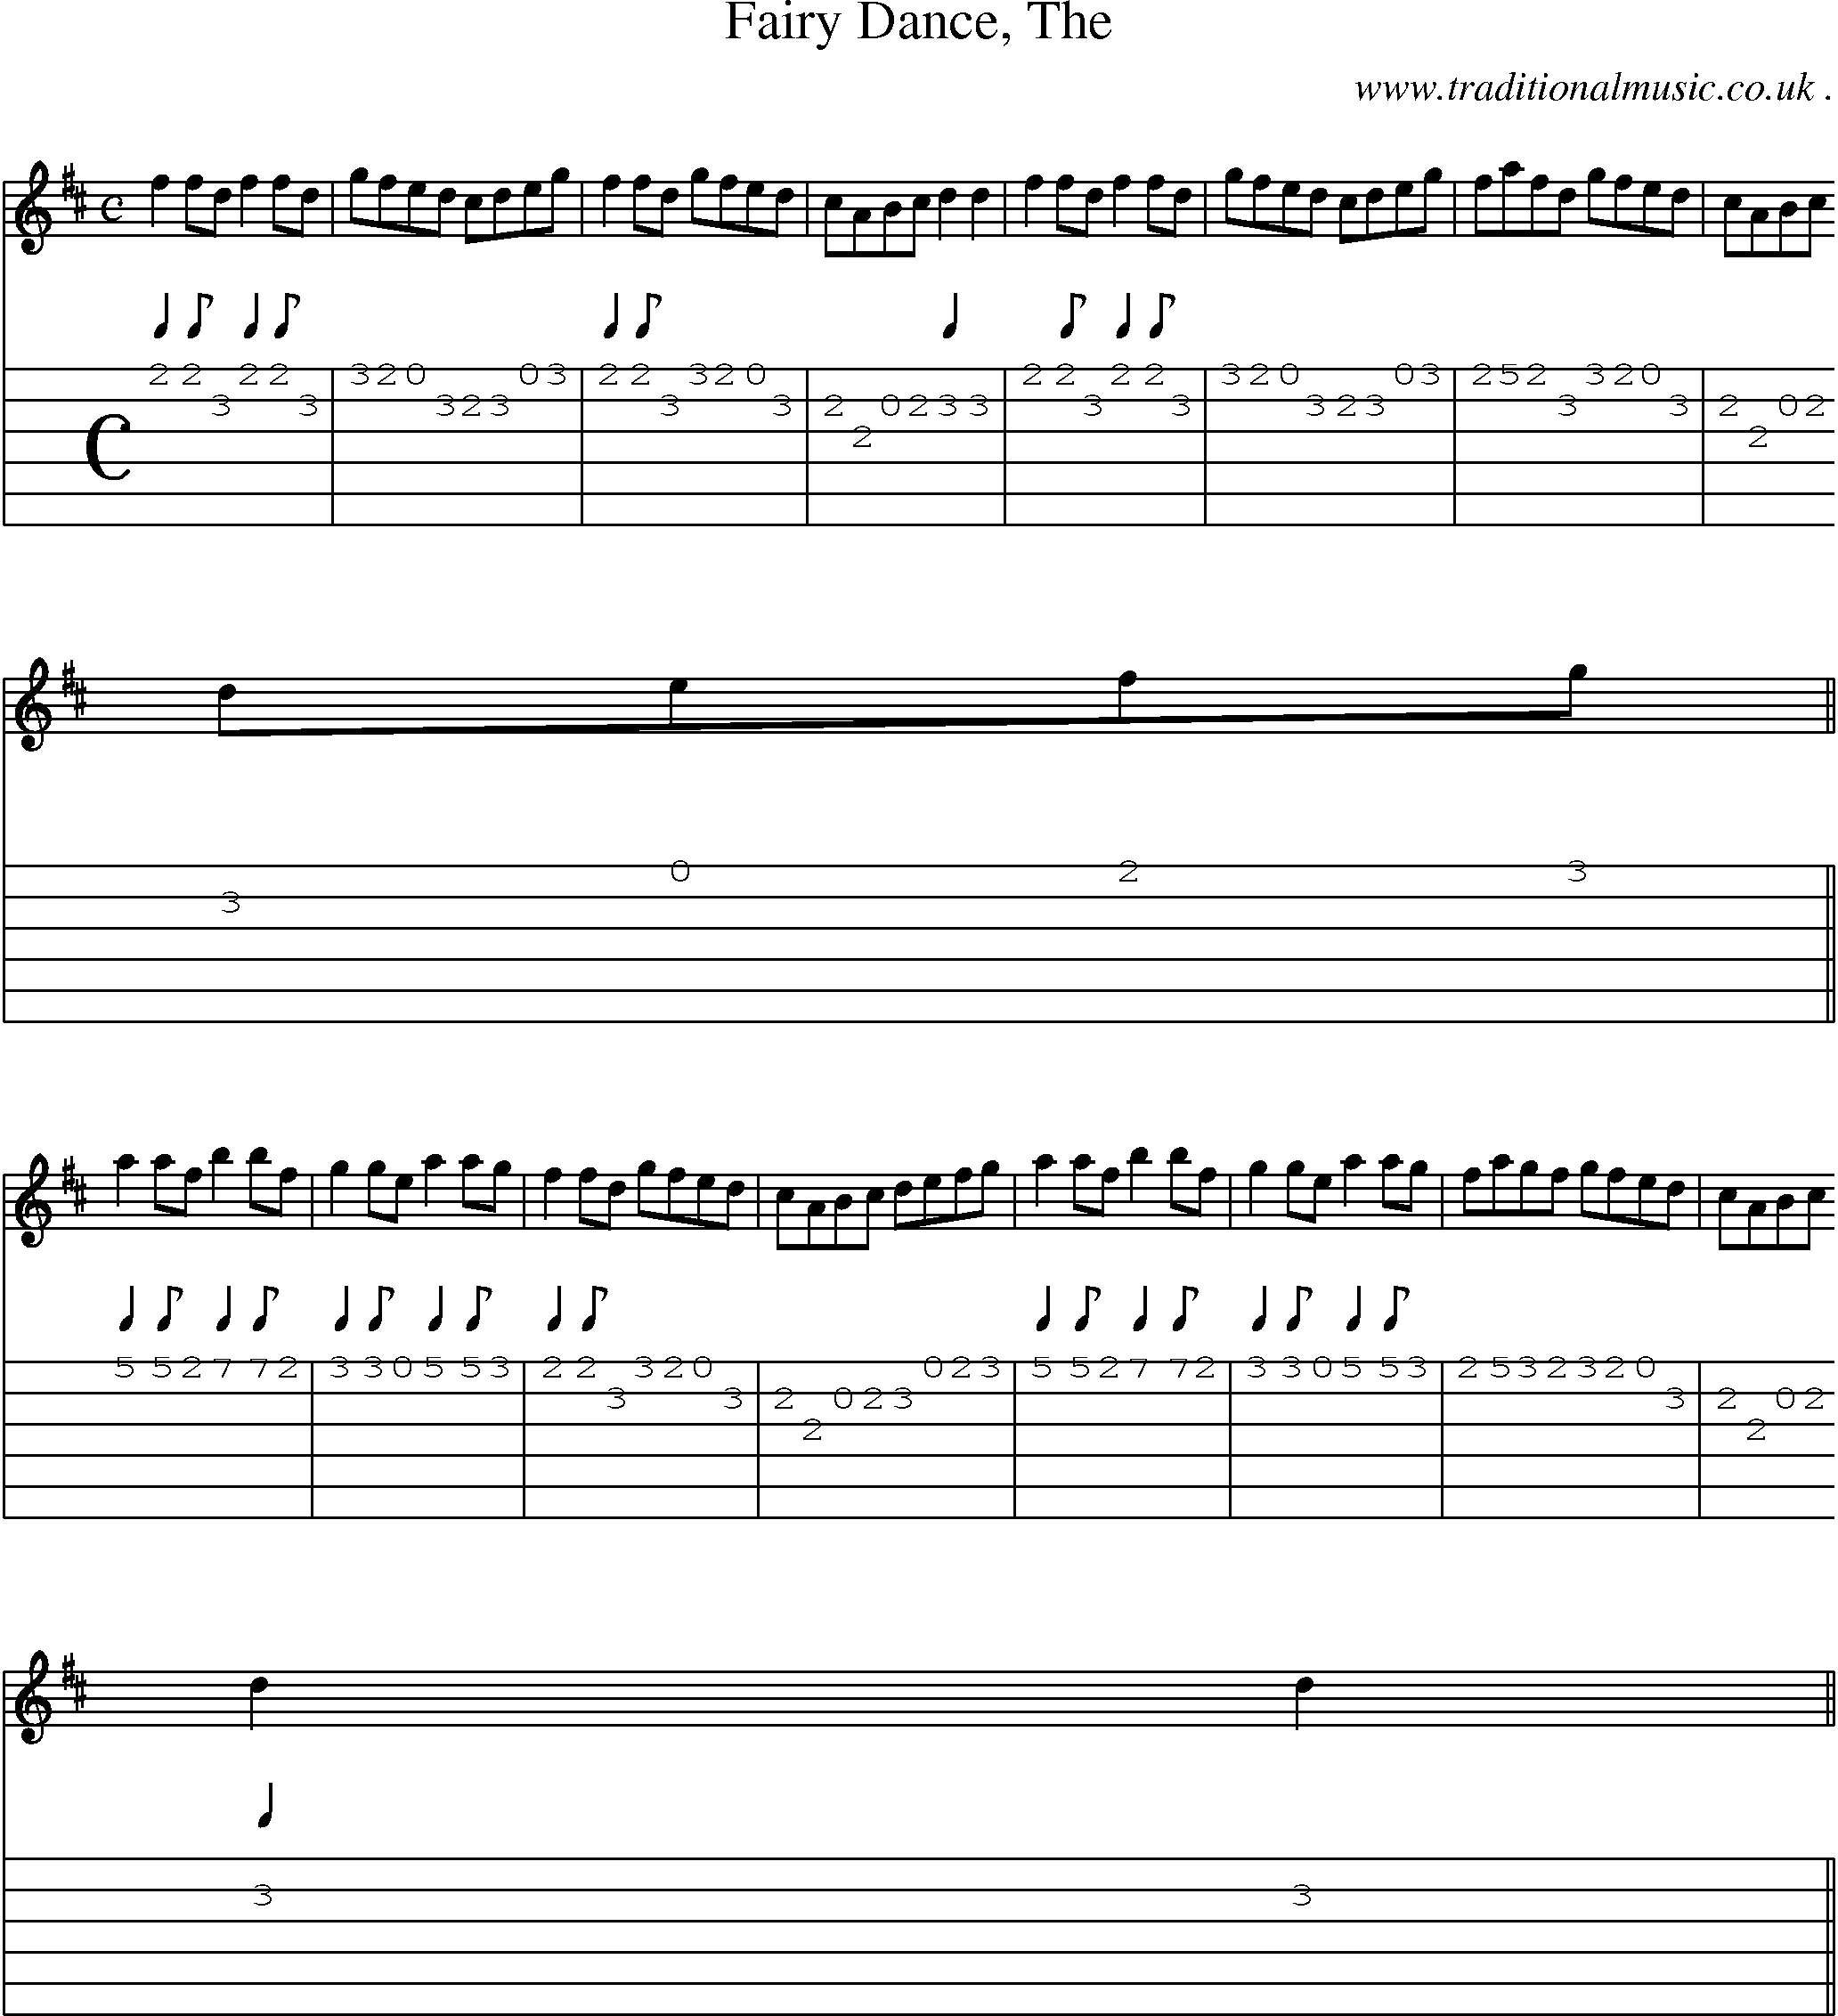 Sheet-music  score, Chords and Guitar Tabs for Fairy Dance The